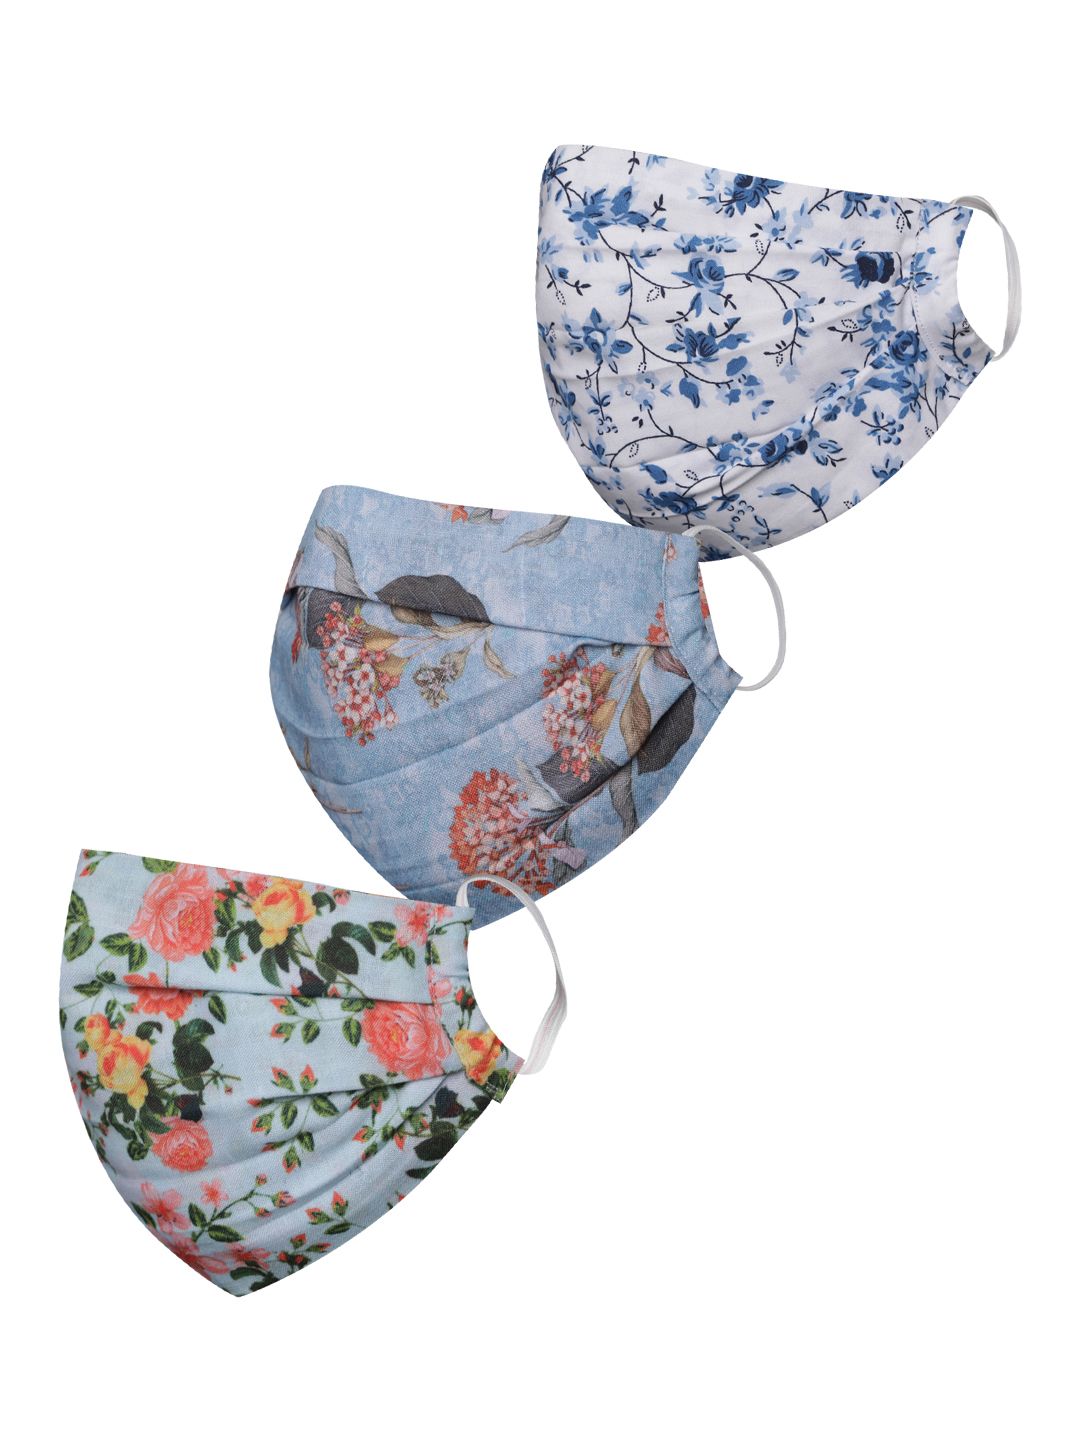 VASTRAMAY Unisex Set of 3 Floral Print 2-Ply Reusable Protective Outdoor Cloth Face Masks Price in India